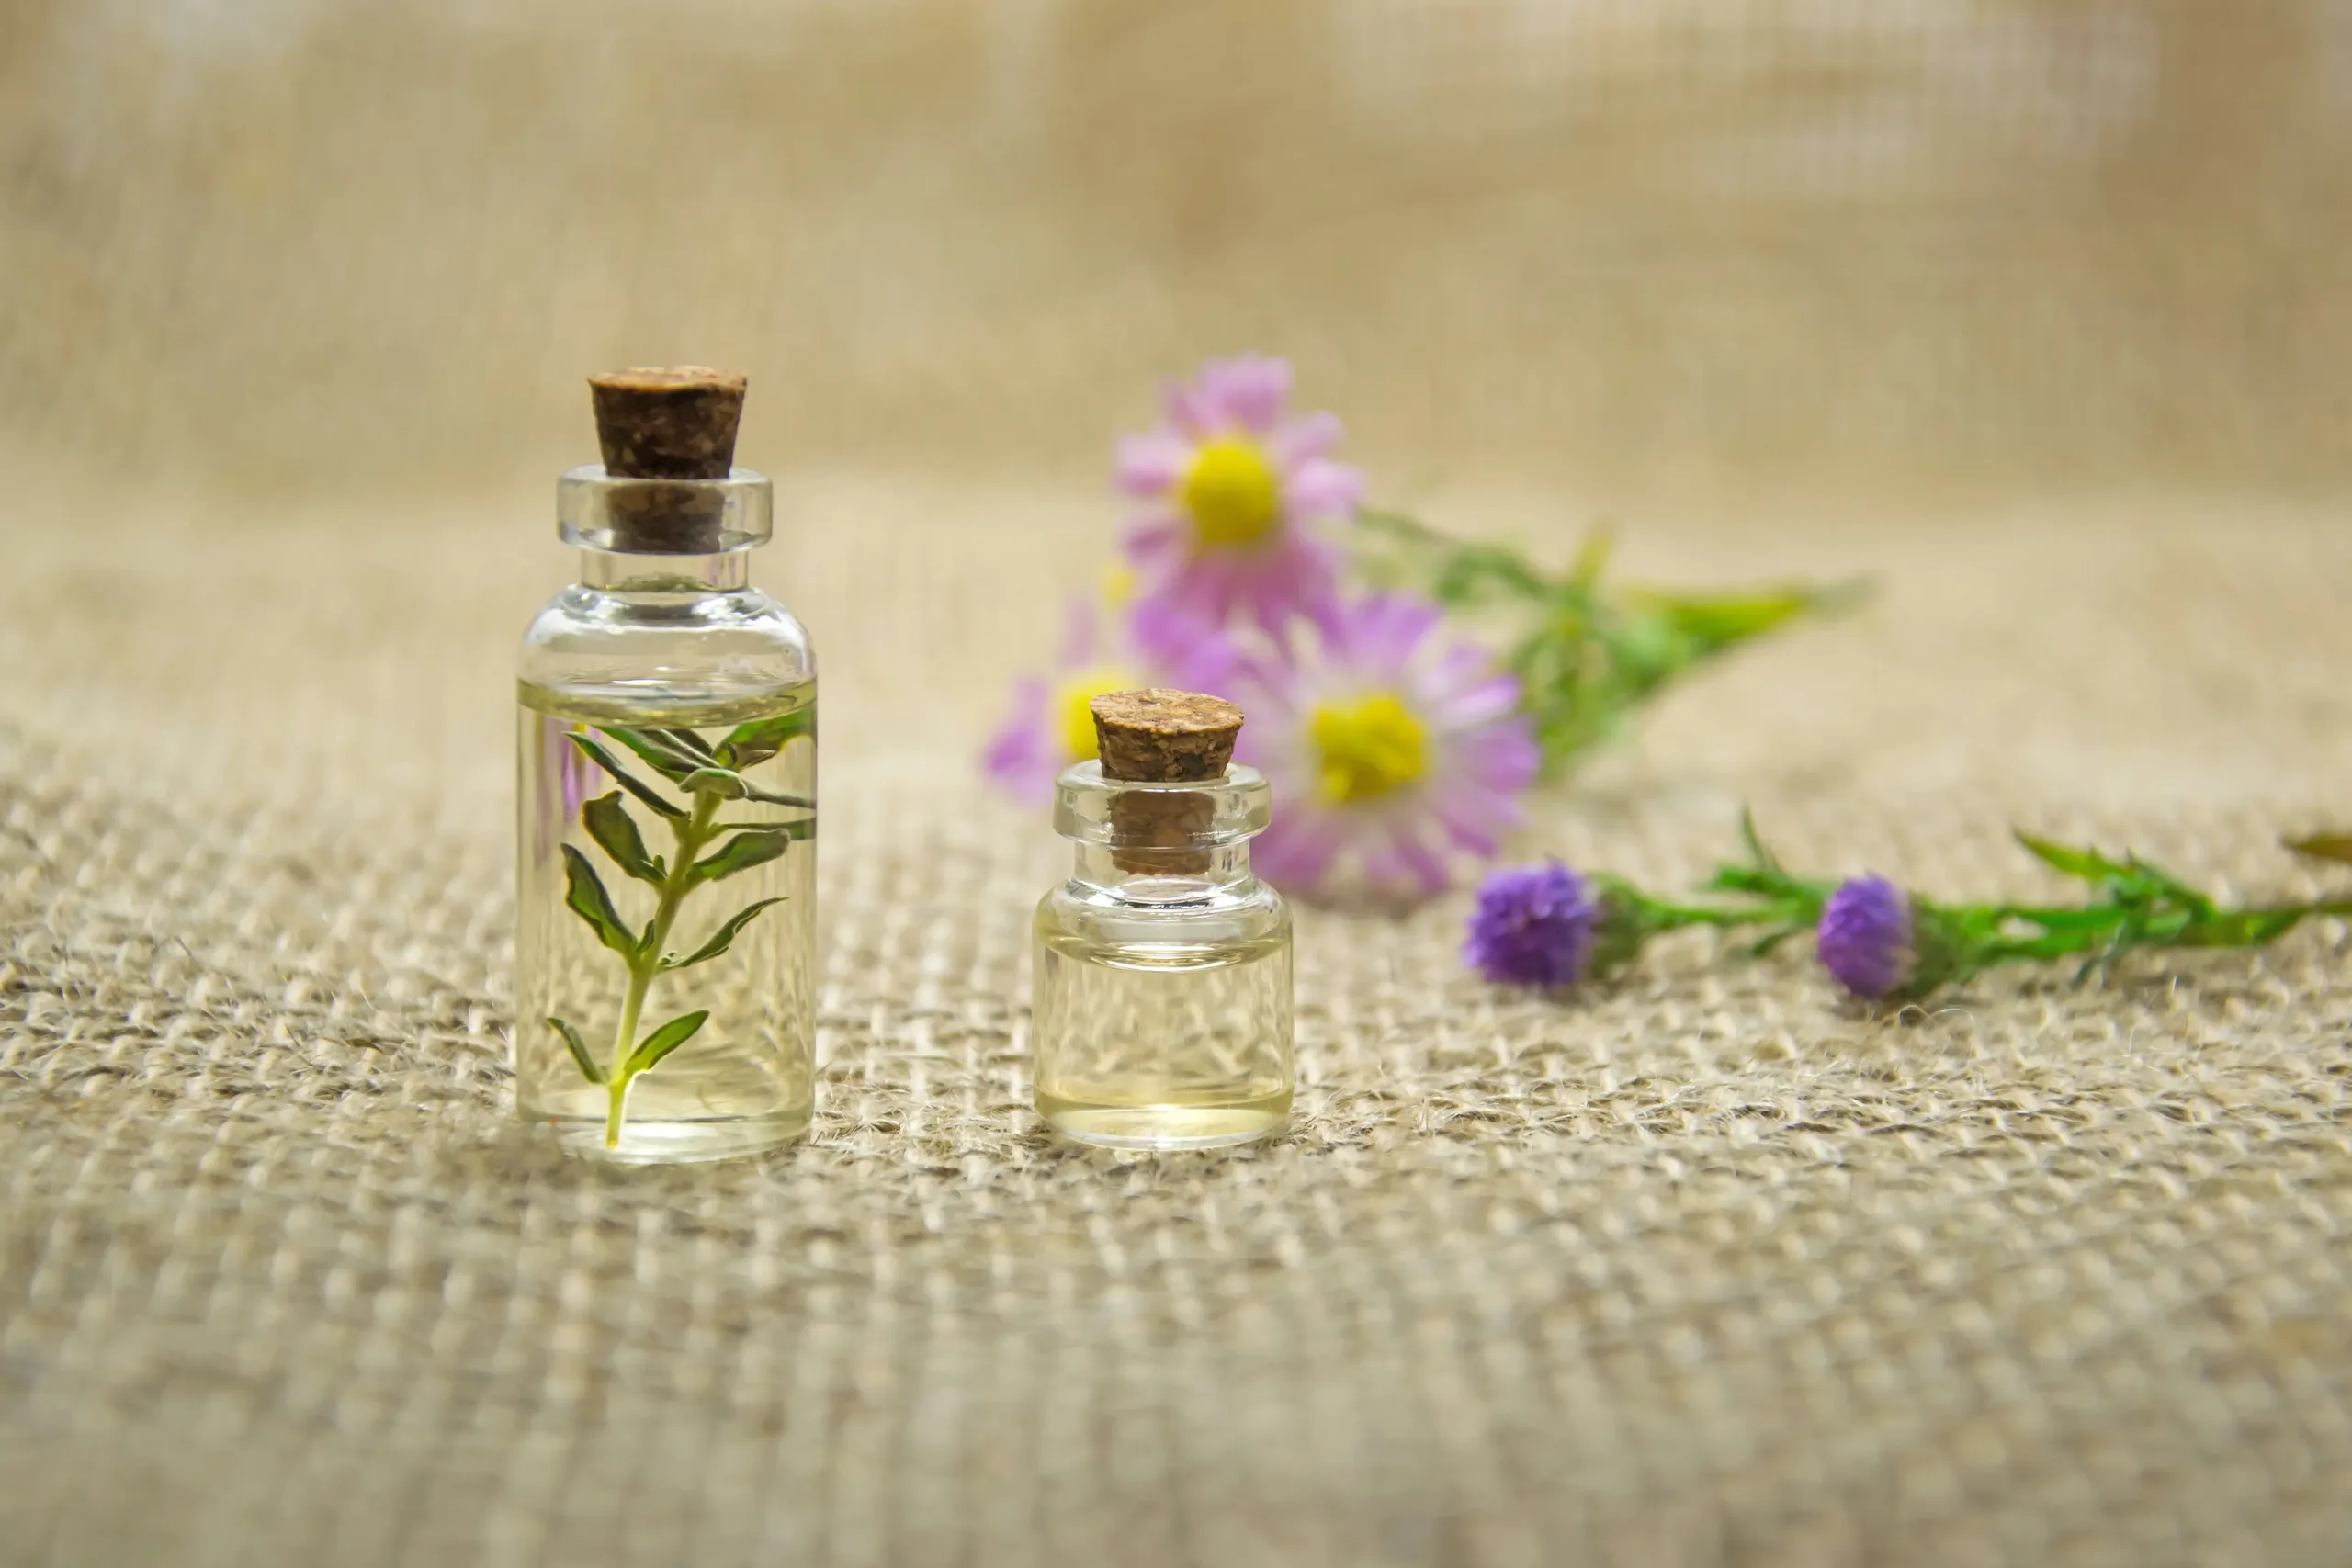 Two small bottles of essential oils on a burlap cloth, Personal care ingredients.